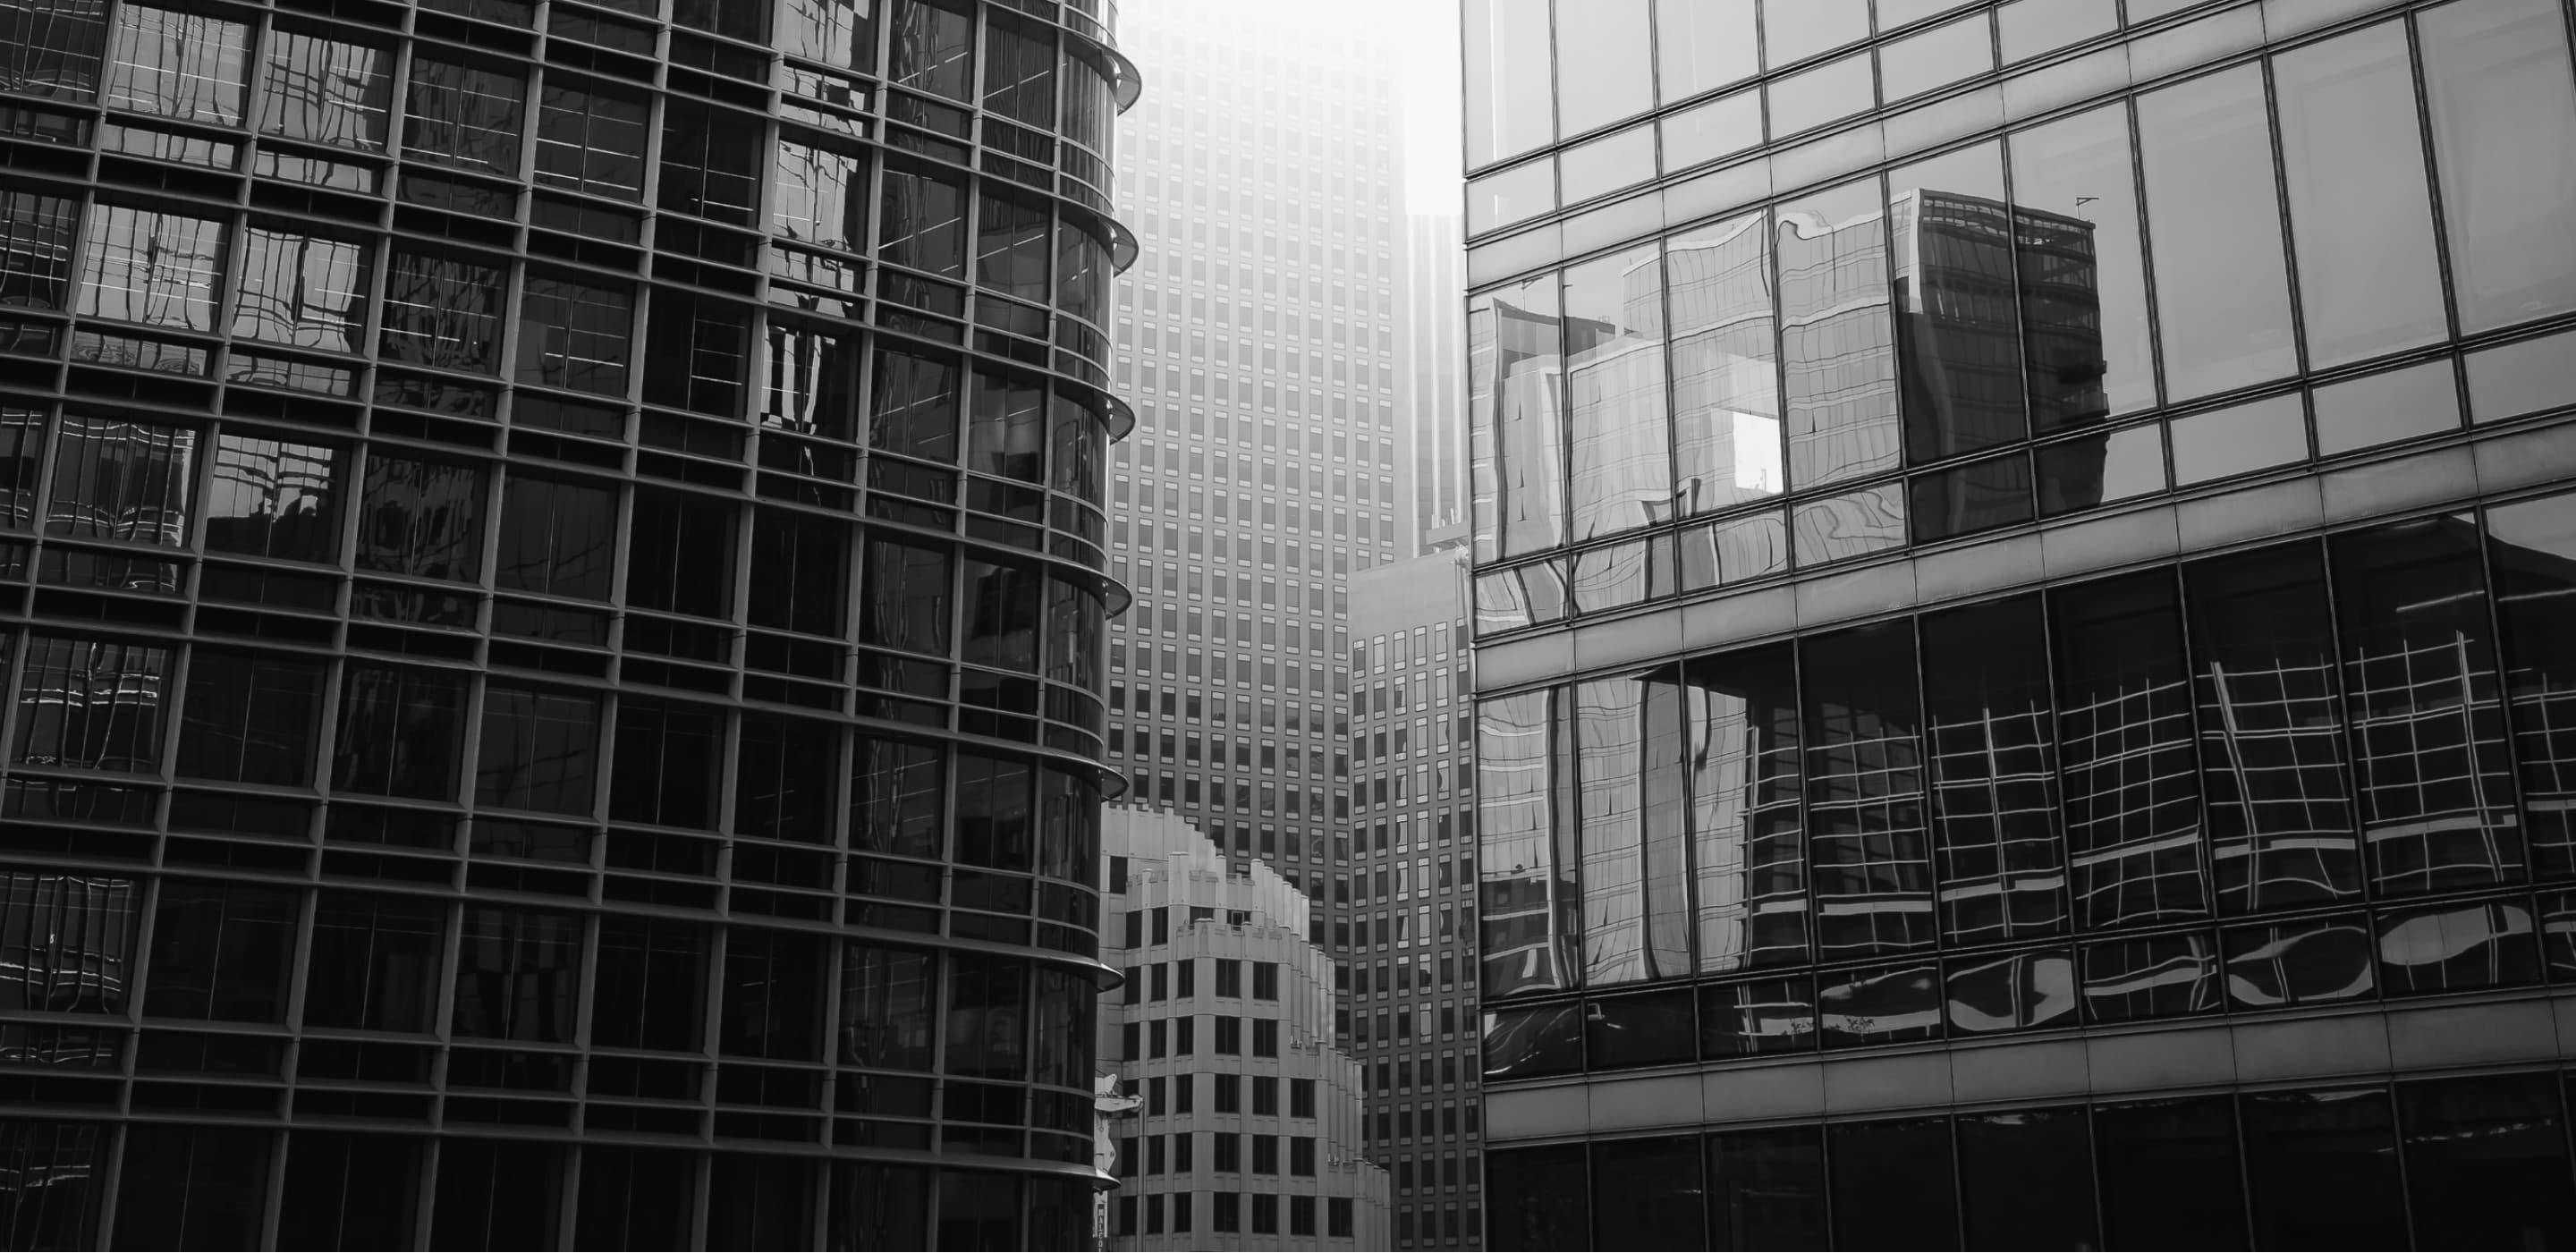 Skyscrapers photographed in black and white